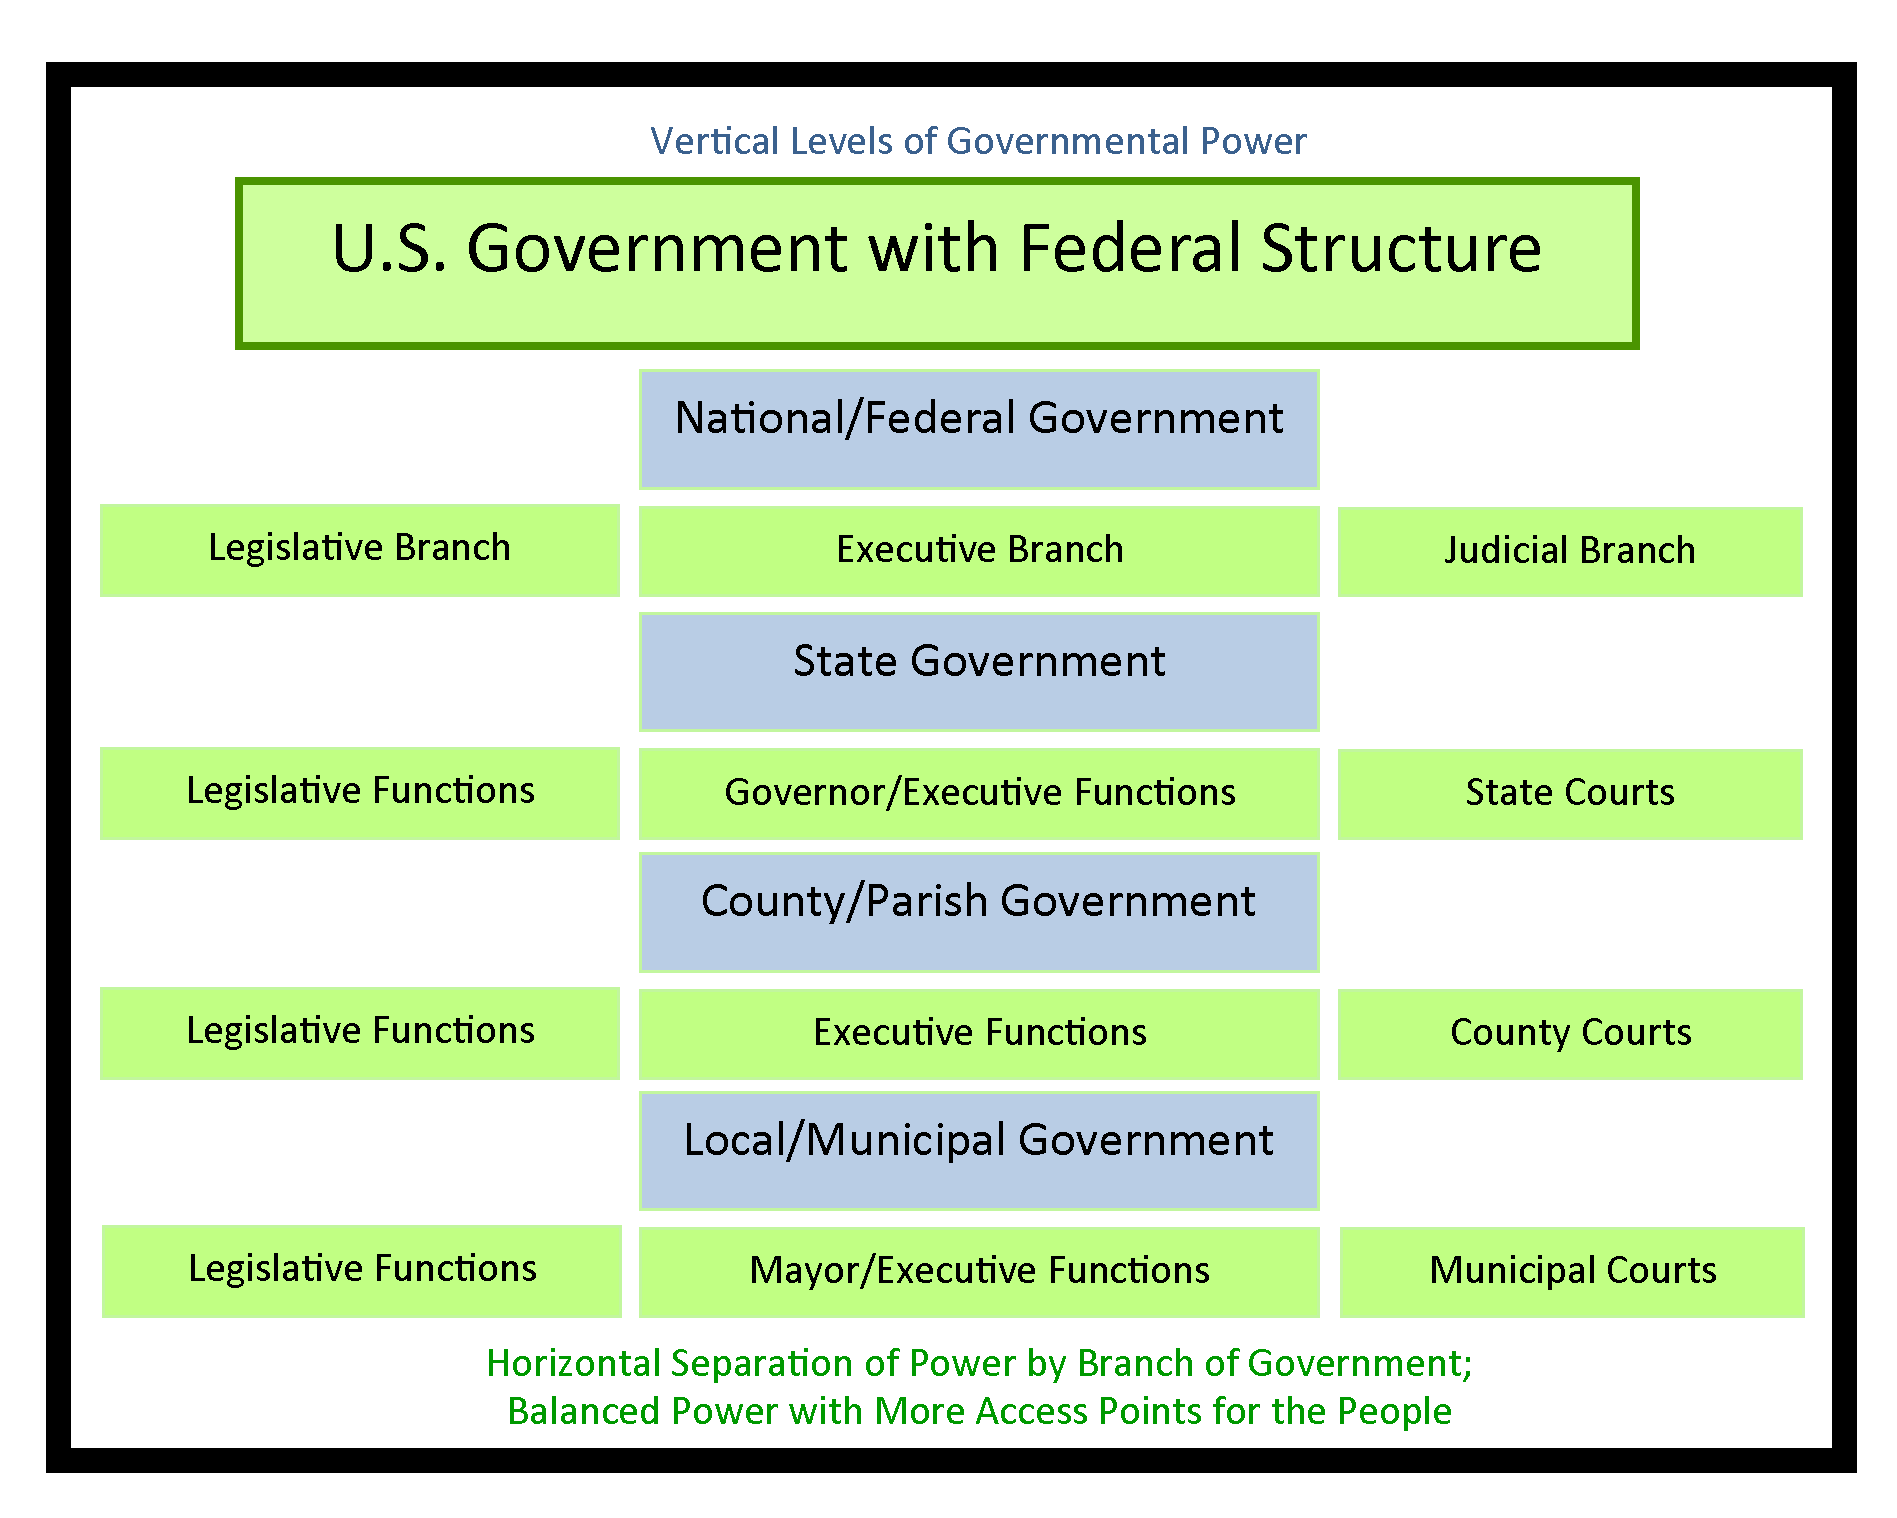 federalism-basic-structure-of-government-united-states-government